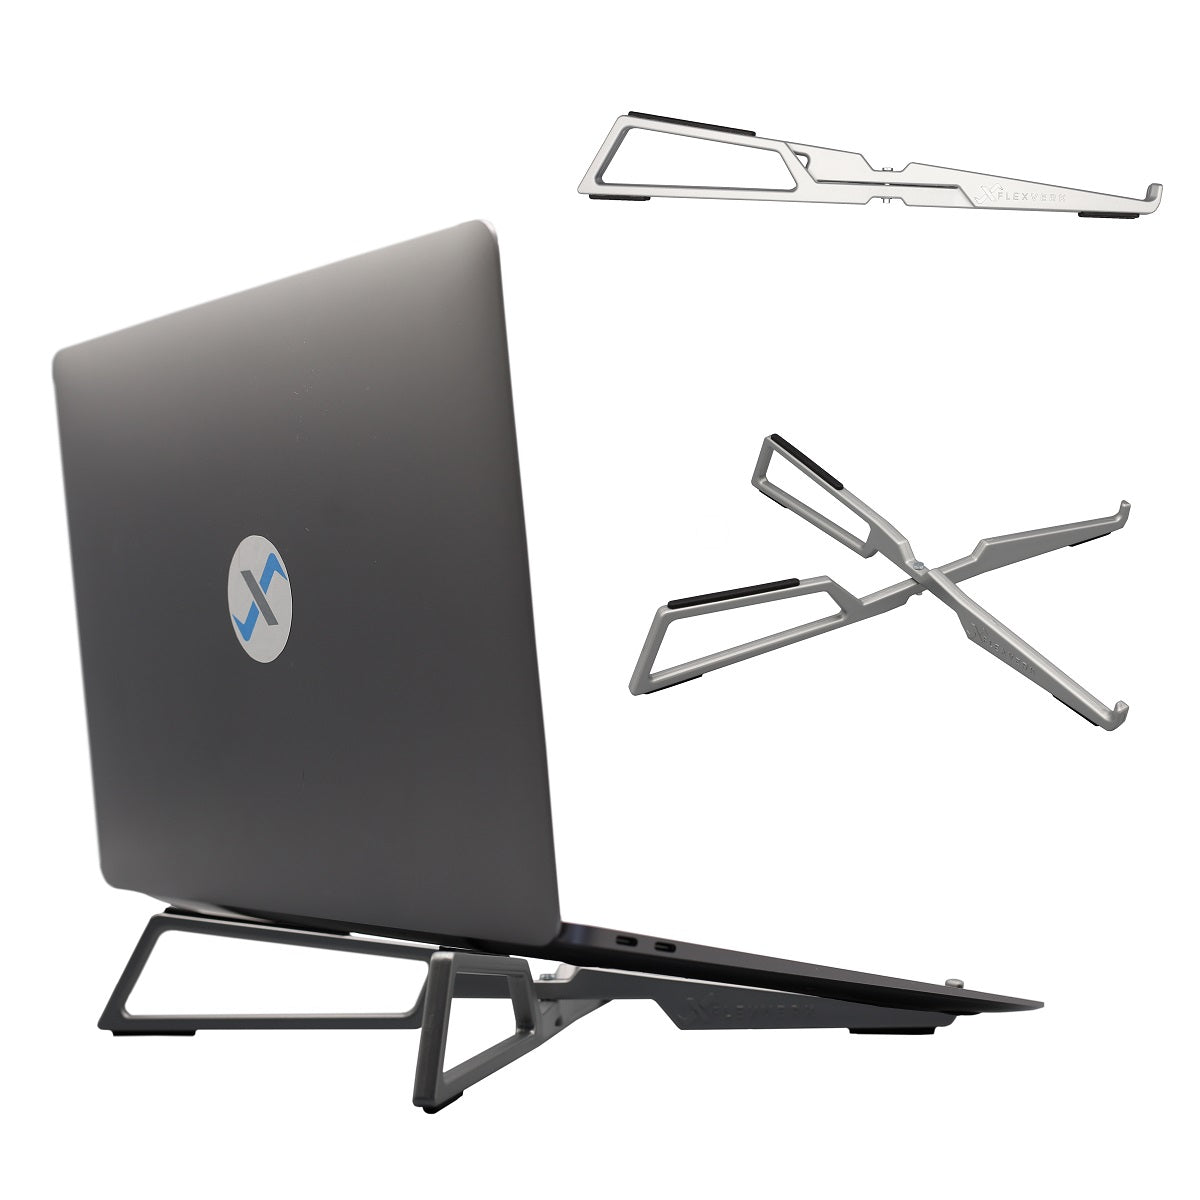 The FlexVerk Laptop Stand shown in silver with an open Macbook Air resting on top. Additionally the laptop stand is shown open and collapsed  on a white background.